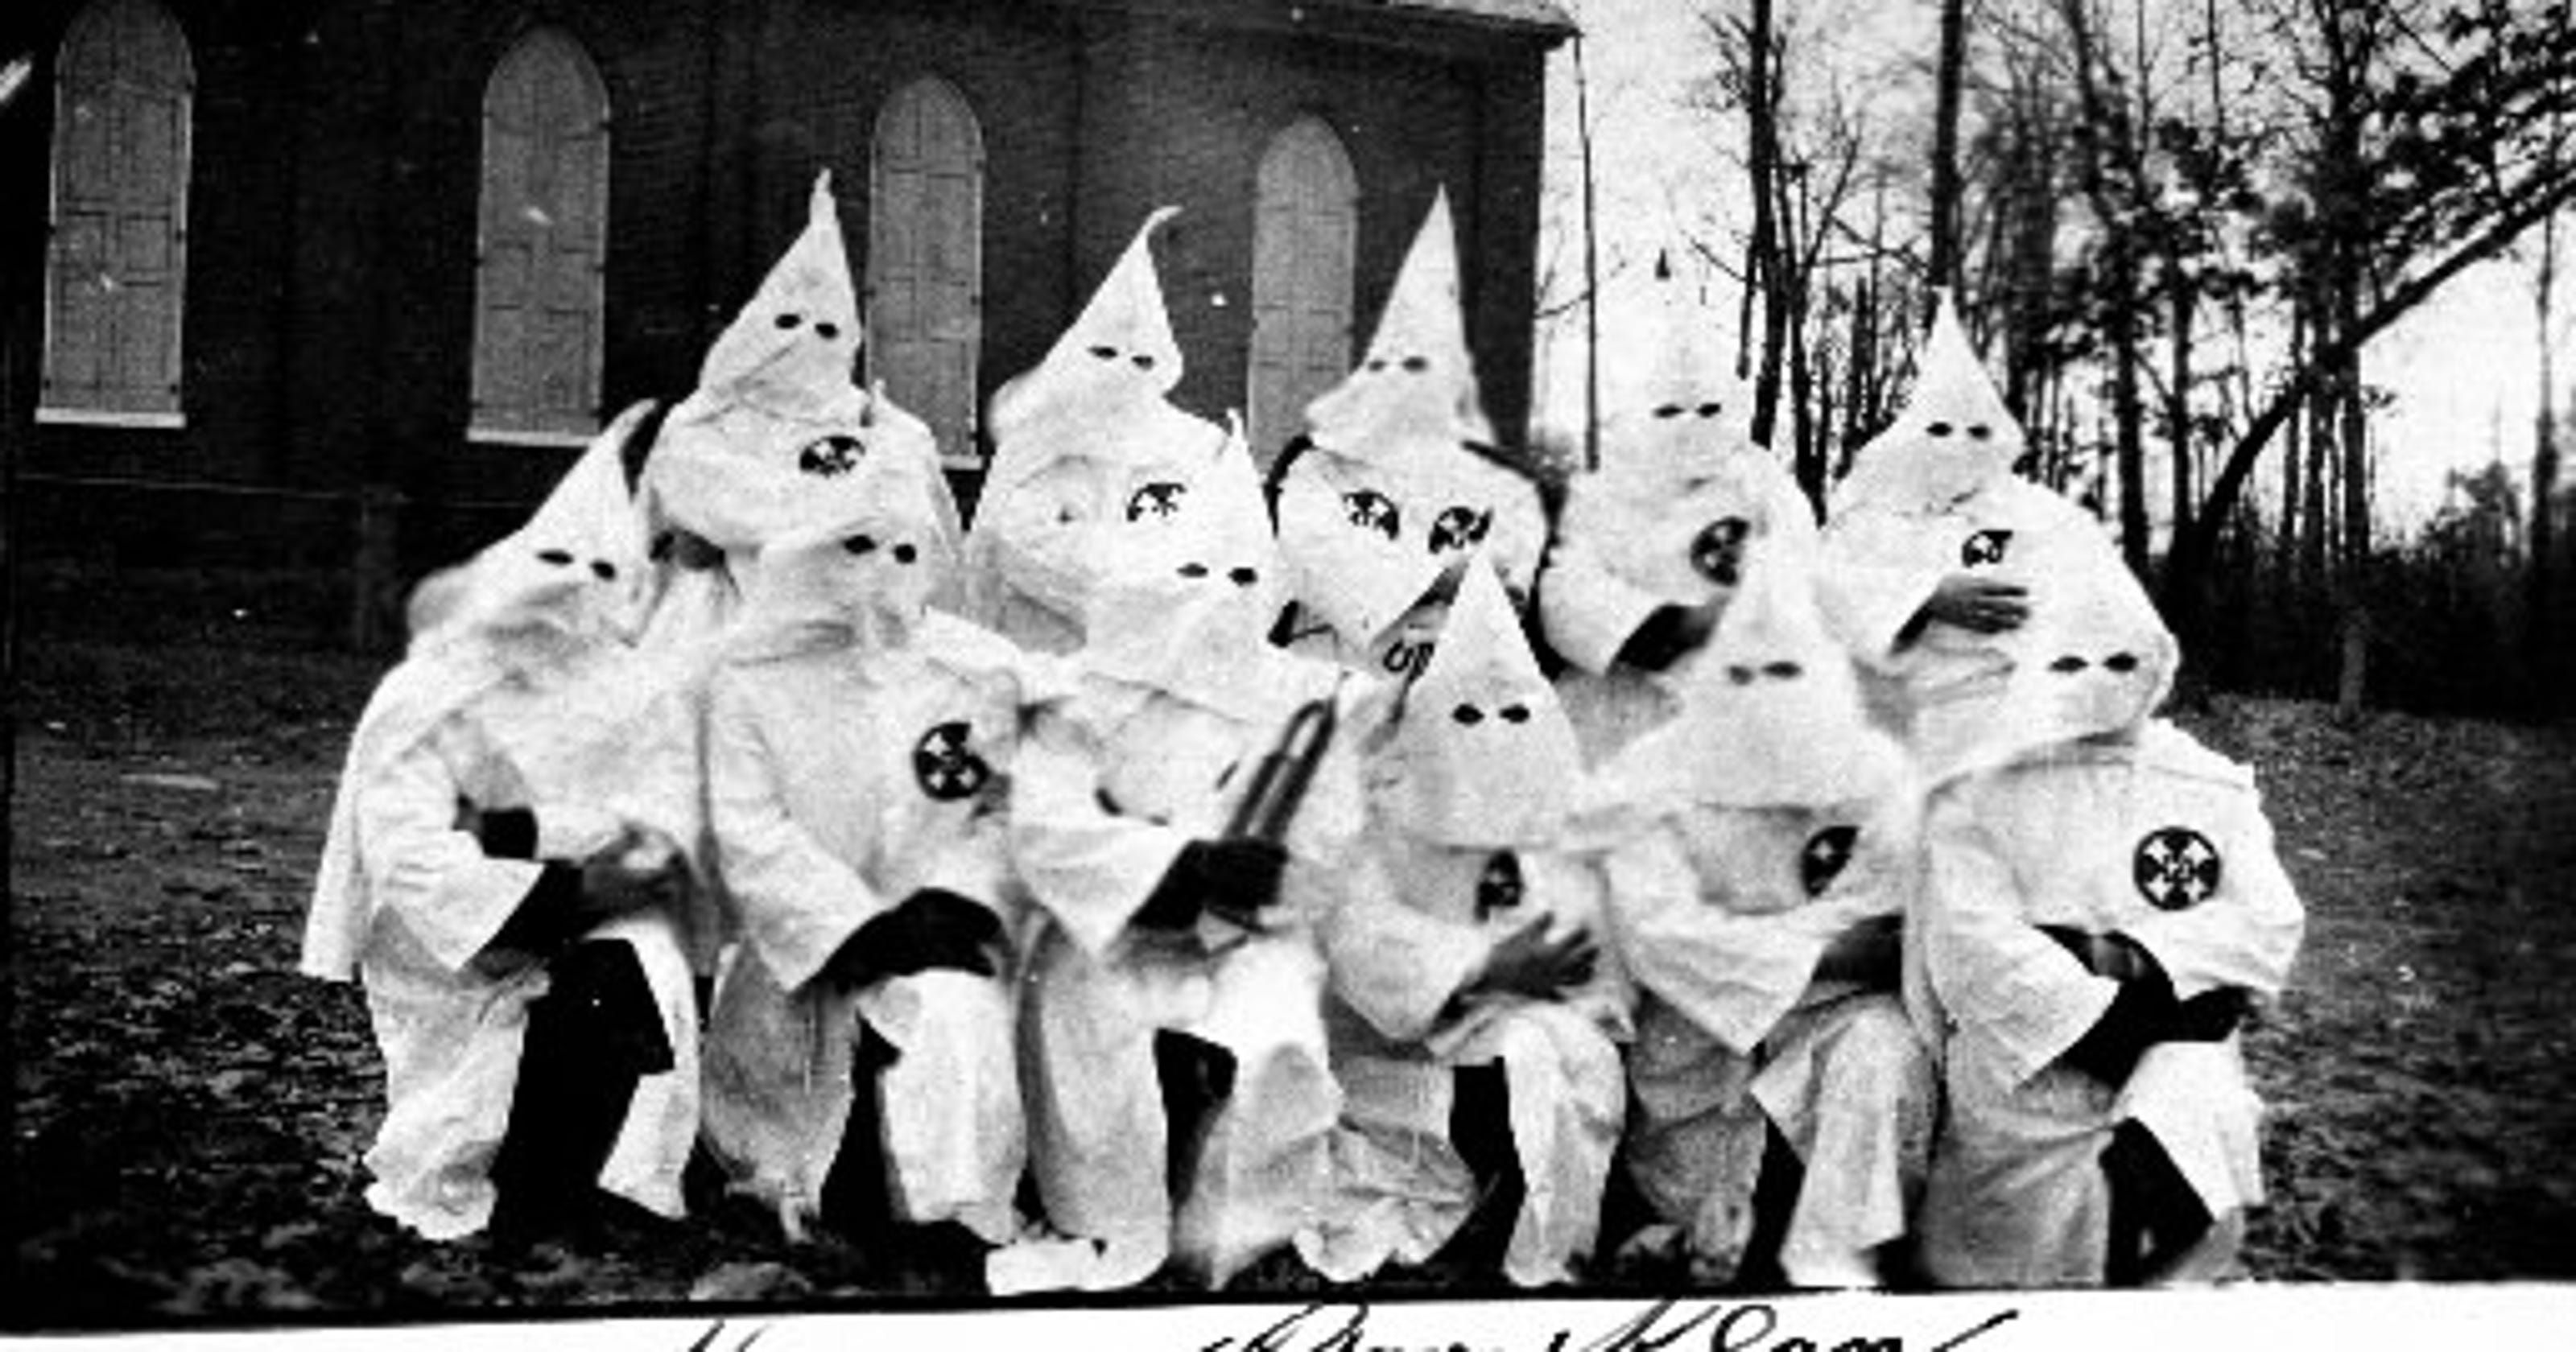 Finder of KKK certificate: 'My first thought was fear ... the Ku Klux Klan would have loved us'